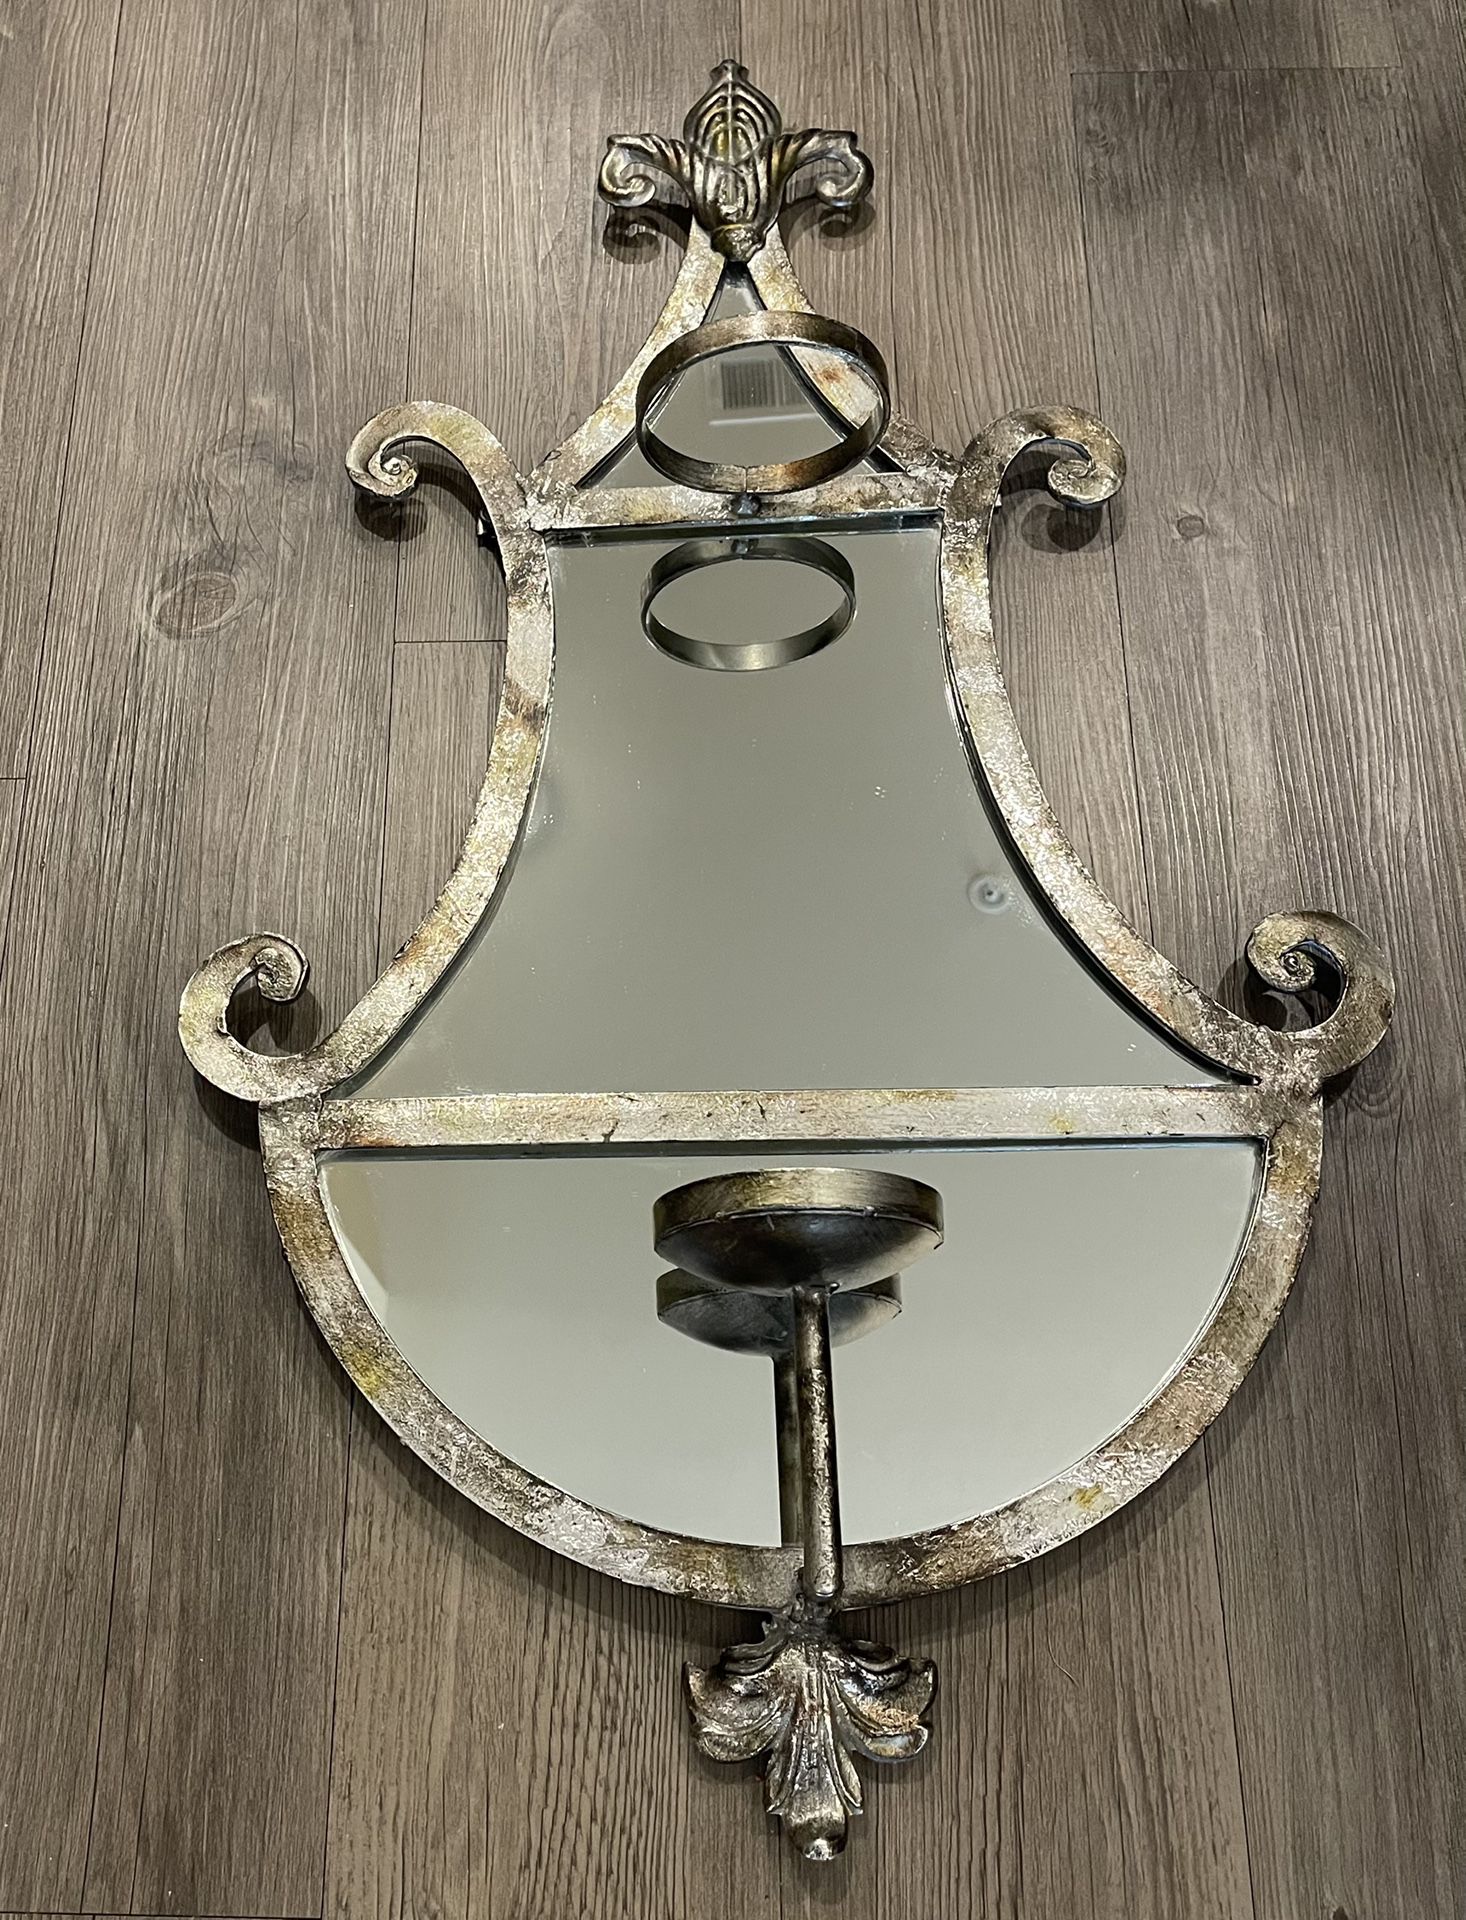 Never Used- Mirrored Wall Sconce.  Weathered Champagne Colored Wrought Iron.  Solid, weights about 8lb.  30h x 18w 